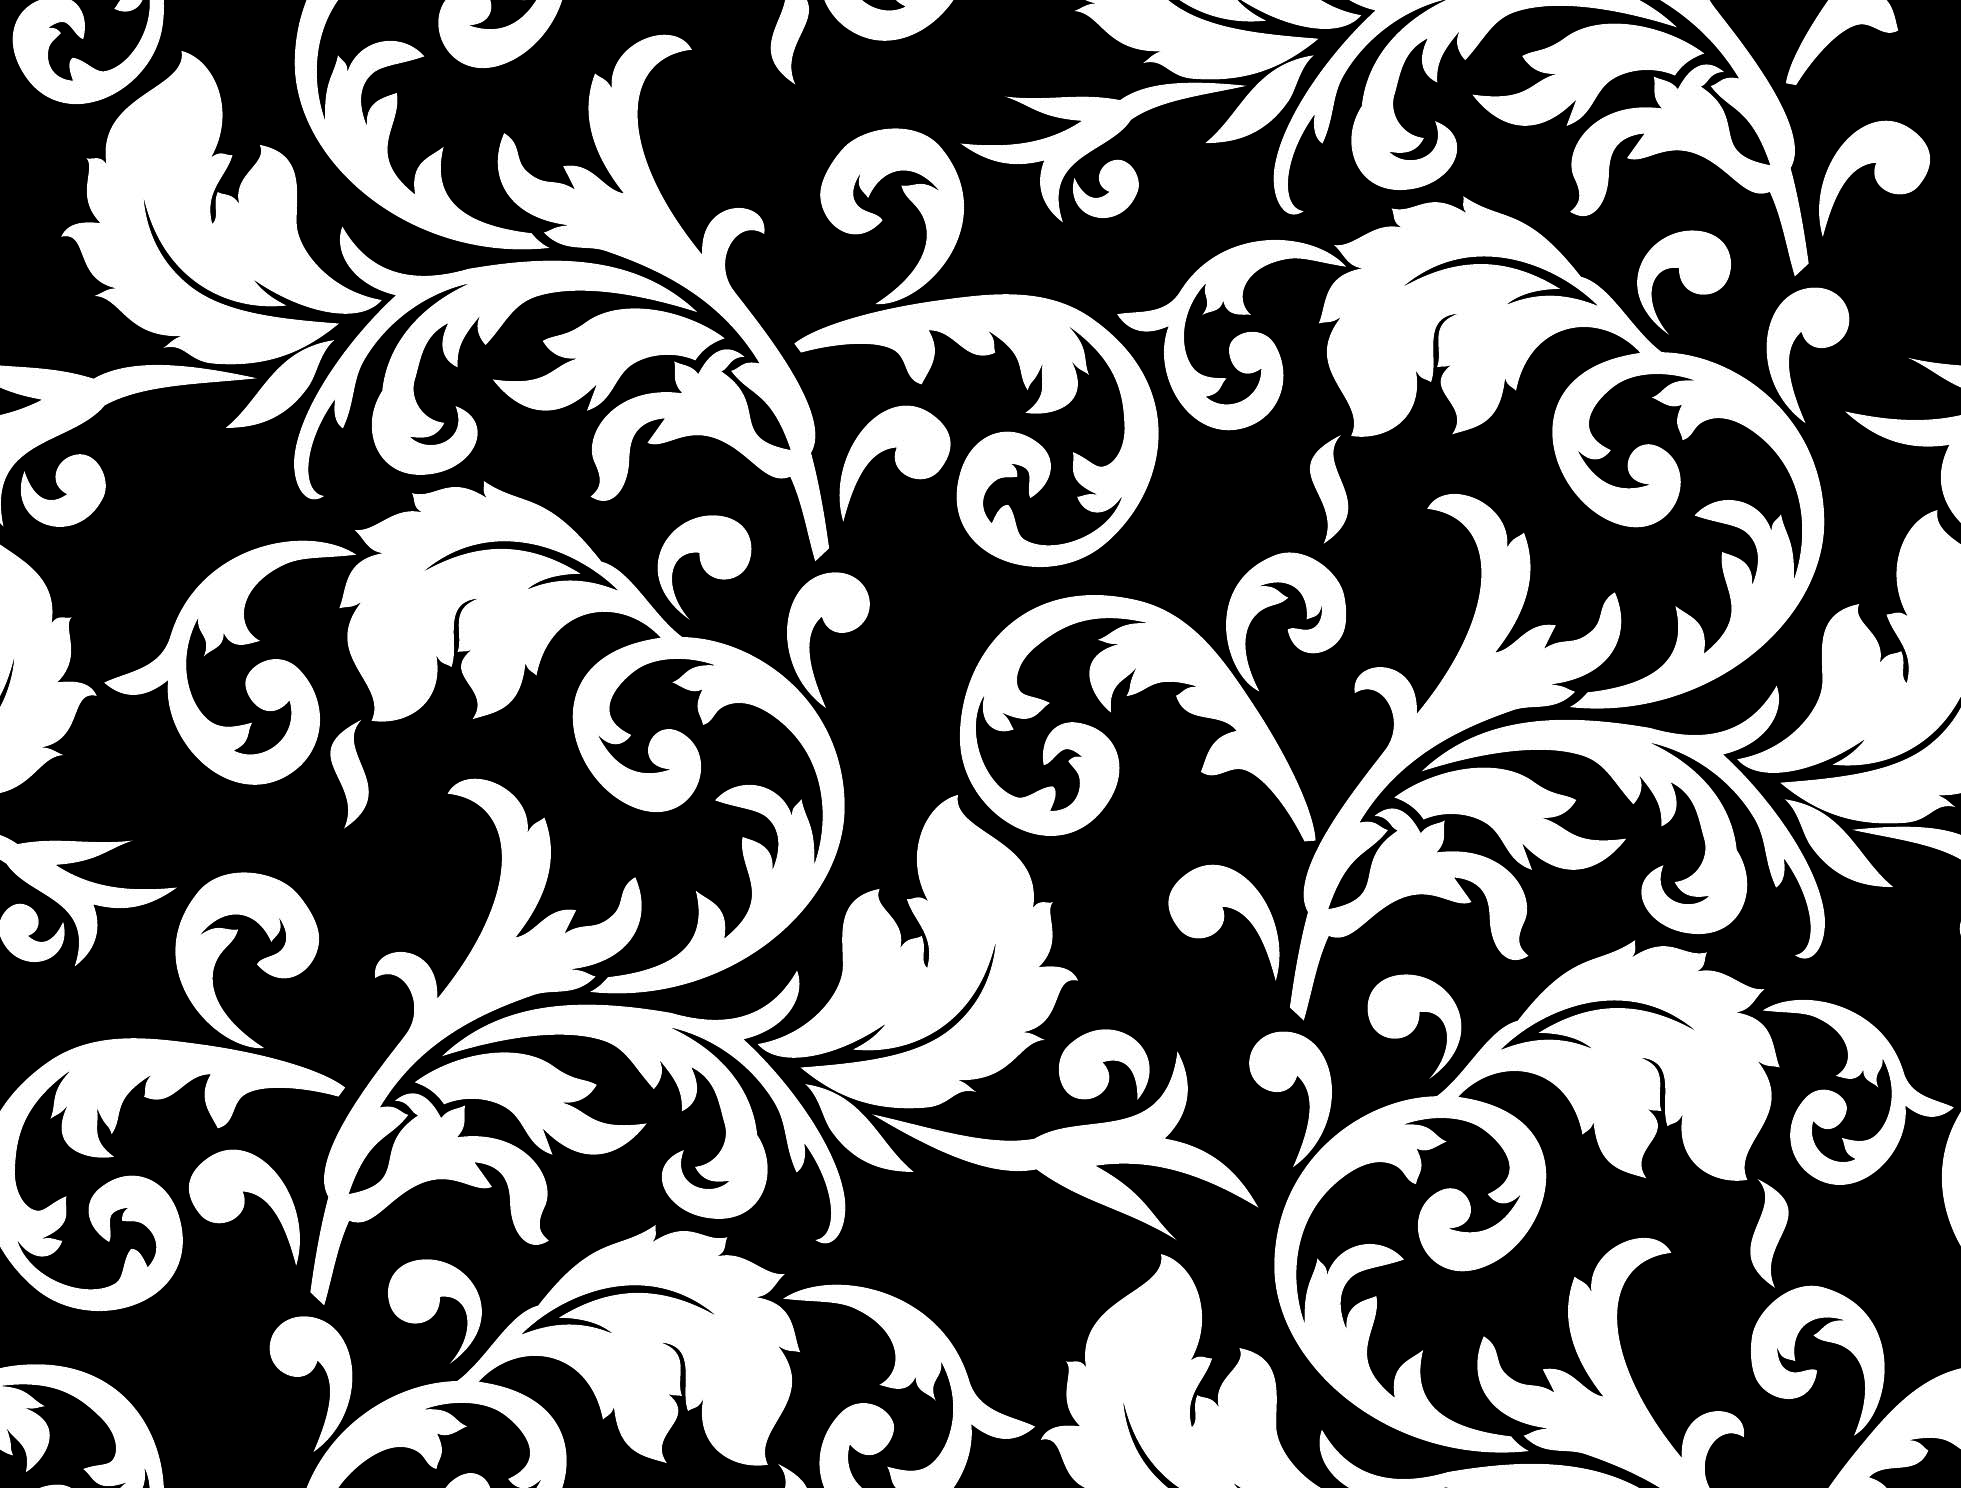 Classical traditional floral pattern background 03 vector Free ...